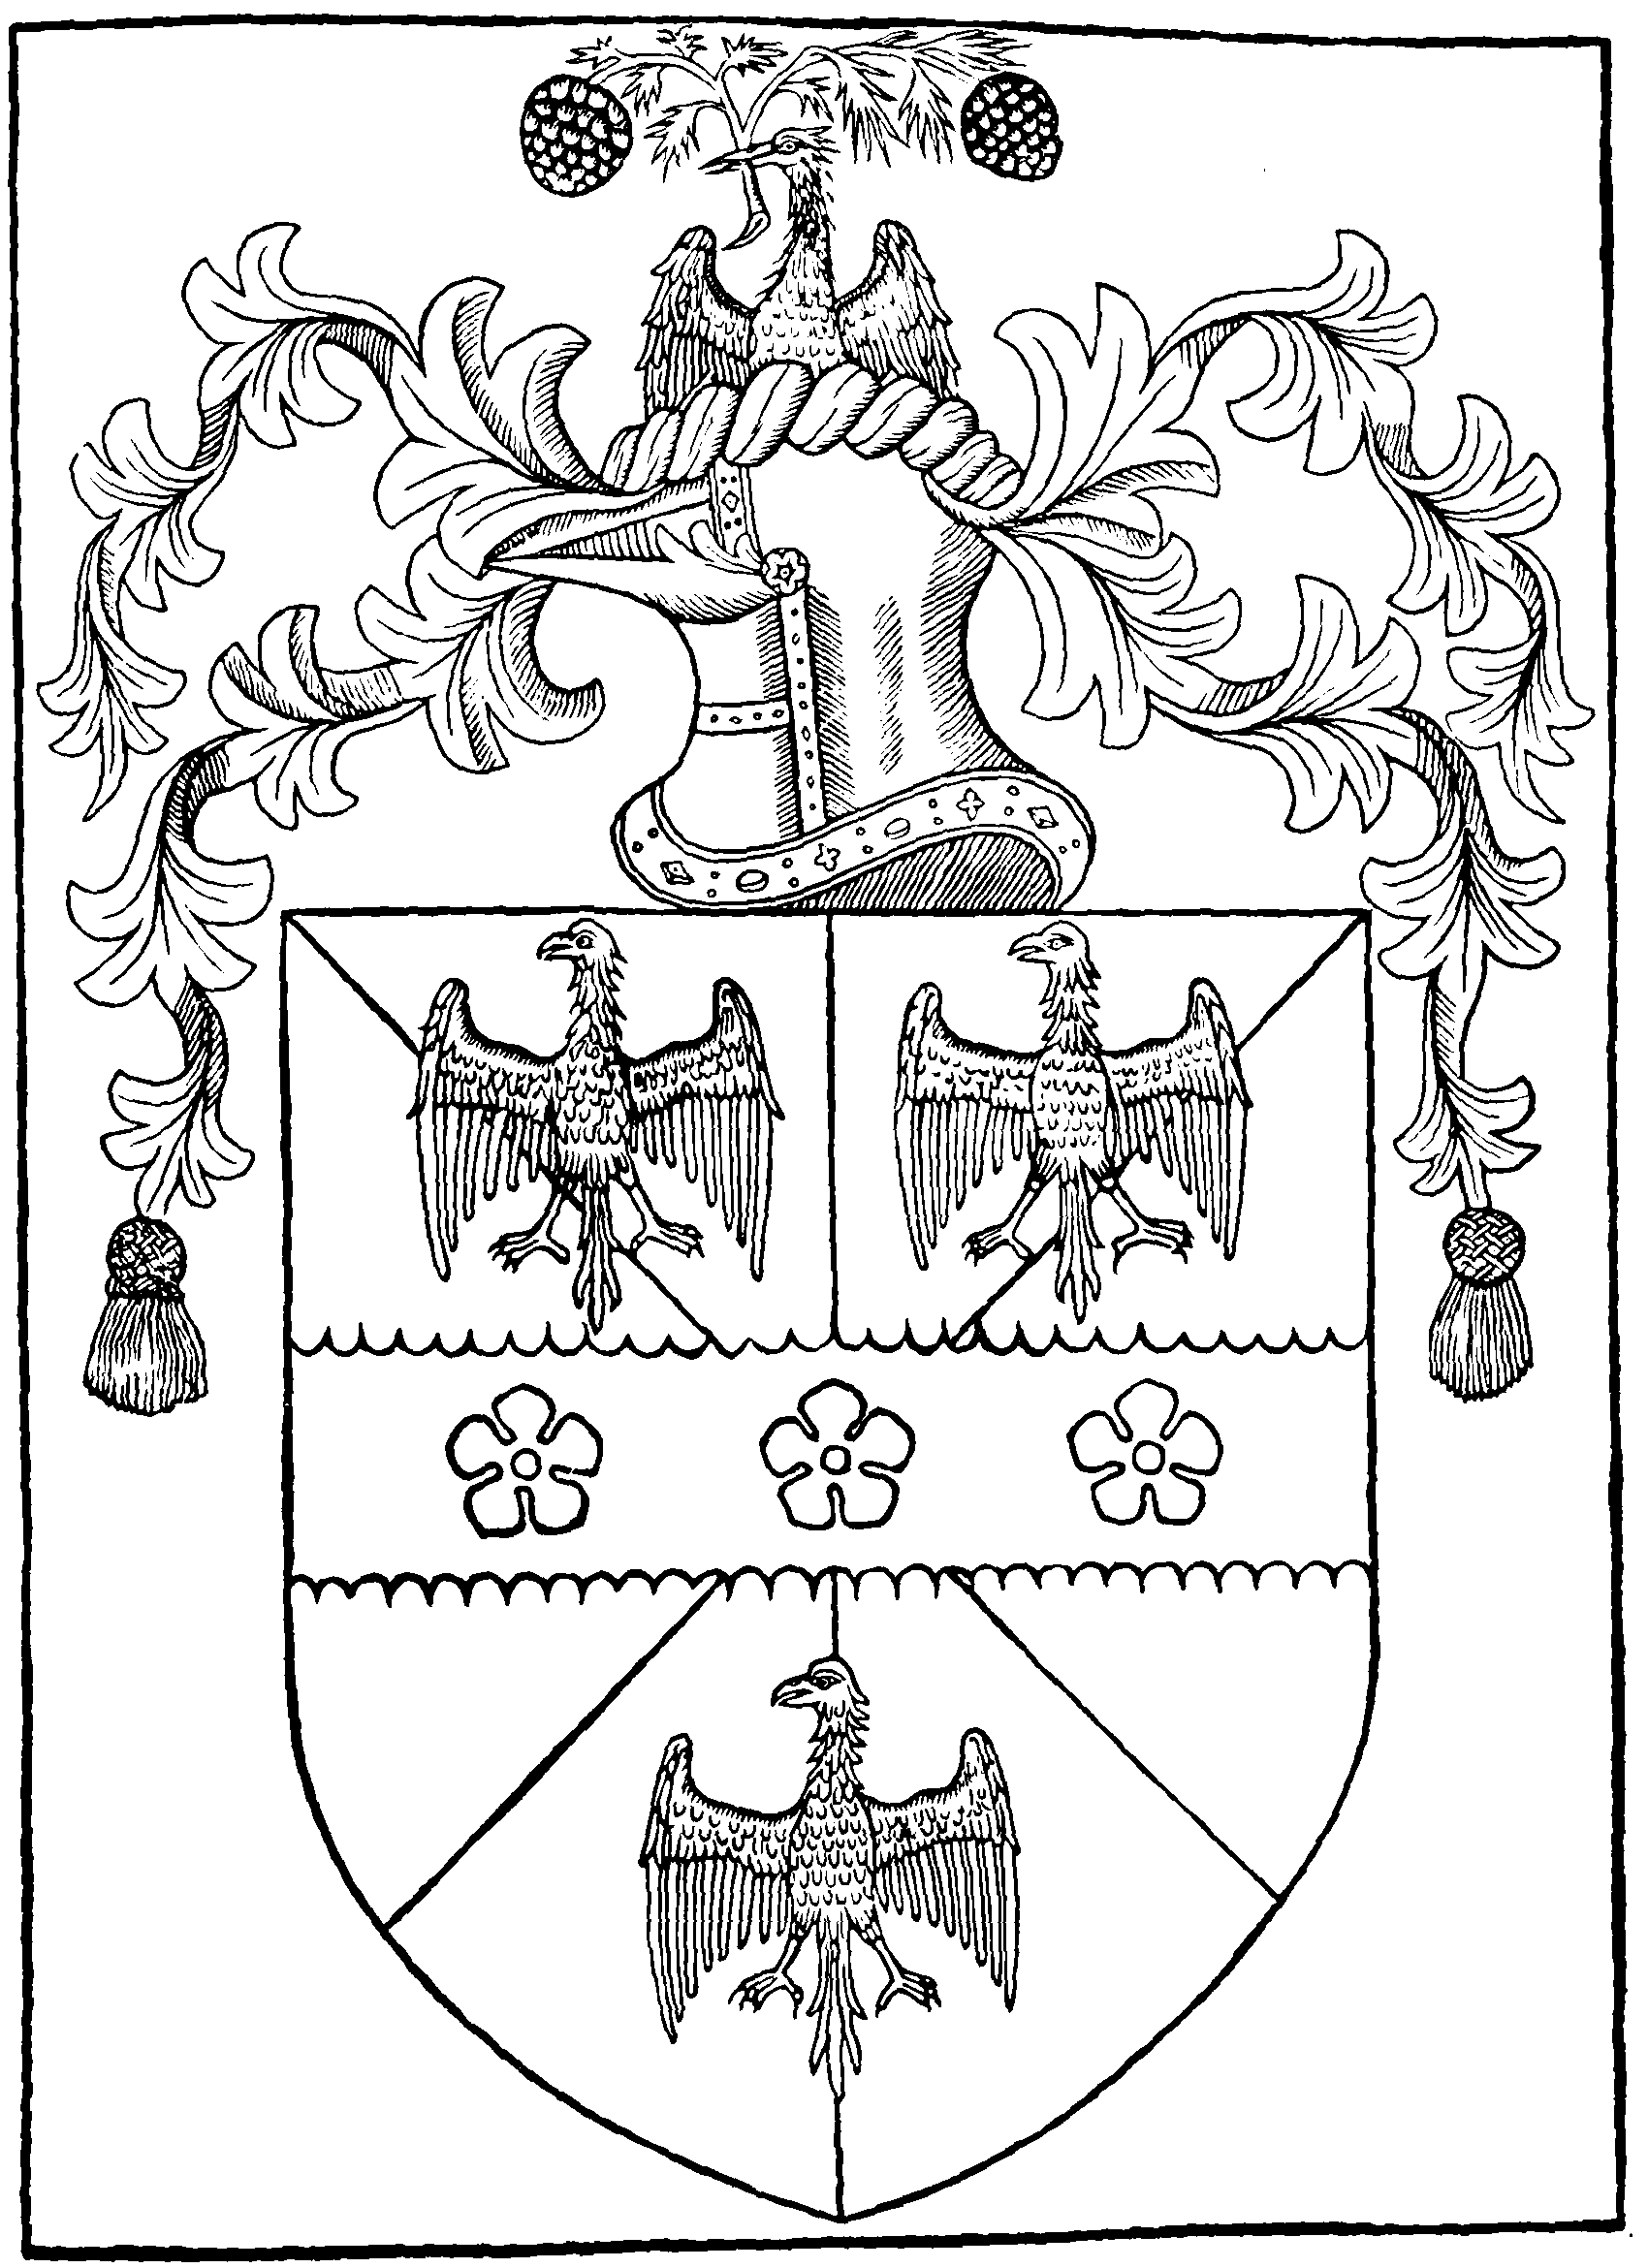 Coat of Arms of the printer, Richard Pynson.